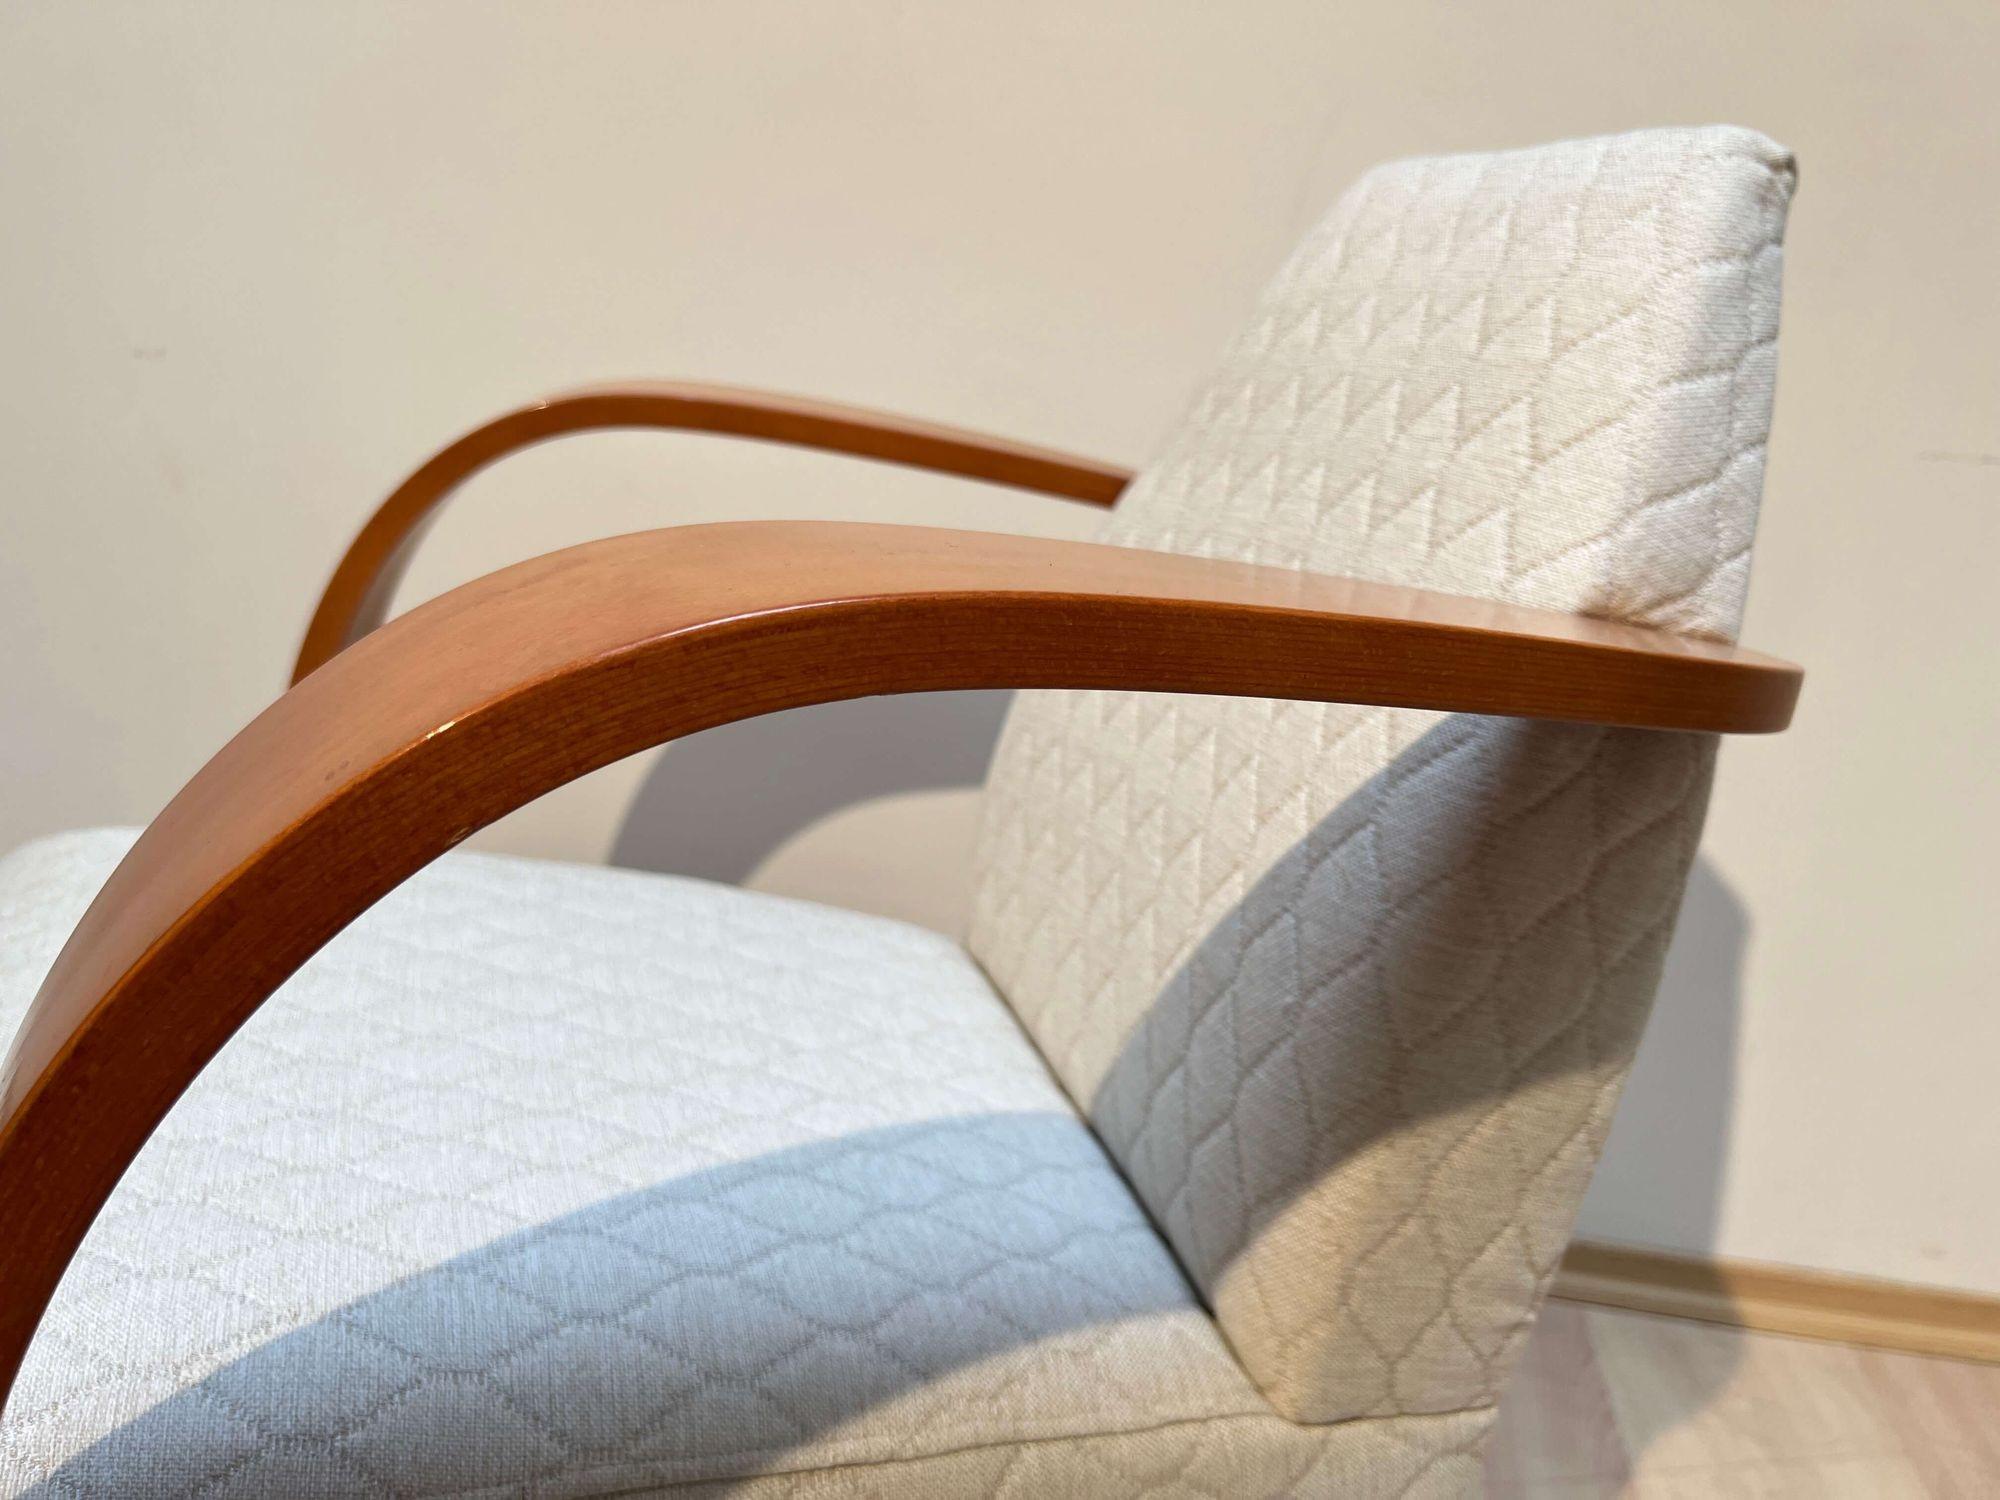 Design Arm Chair, Beech Wood, Cream-white Quilt Fabric, Spain, 1990s For Sale 8